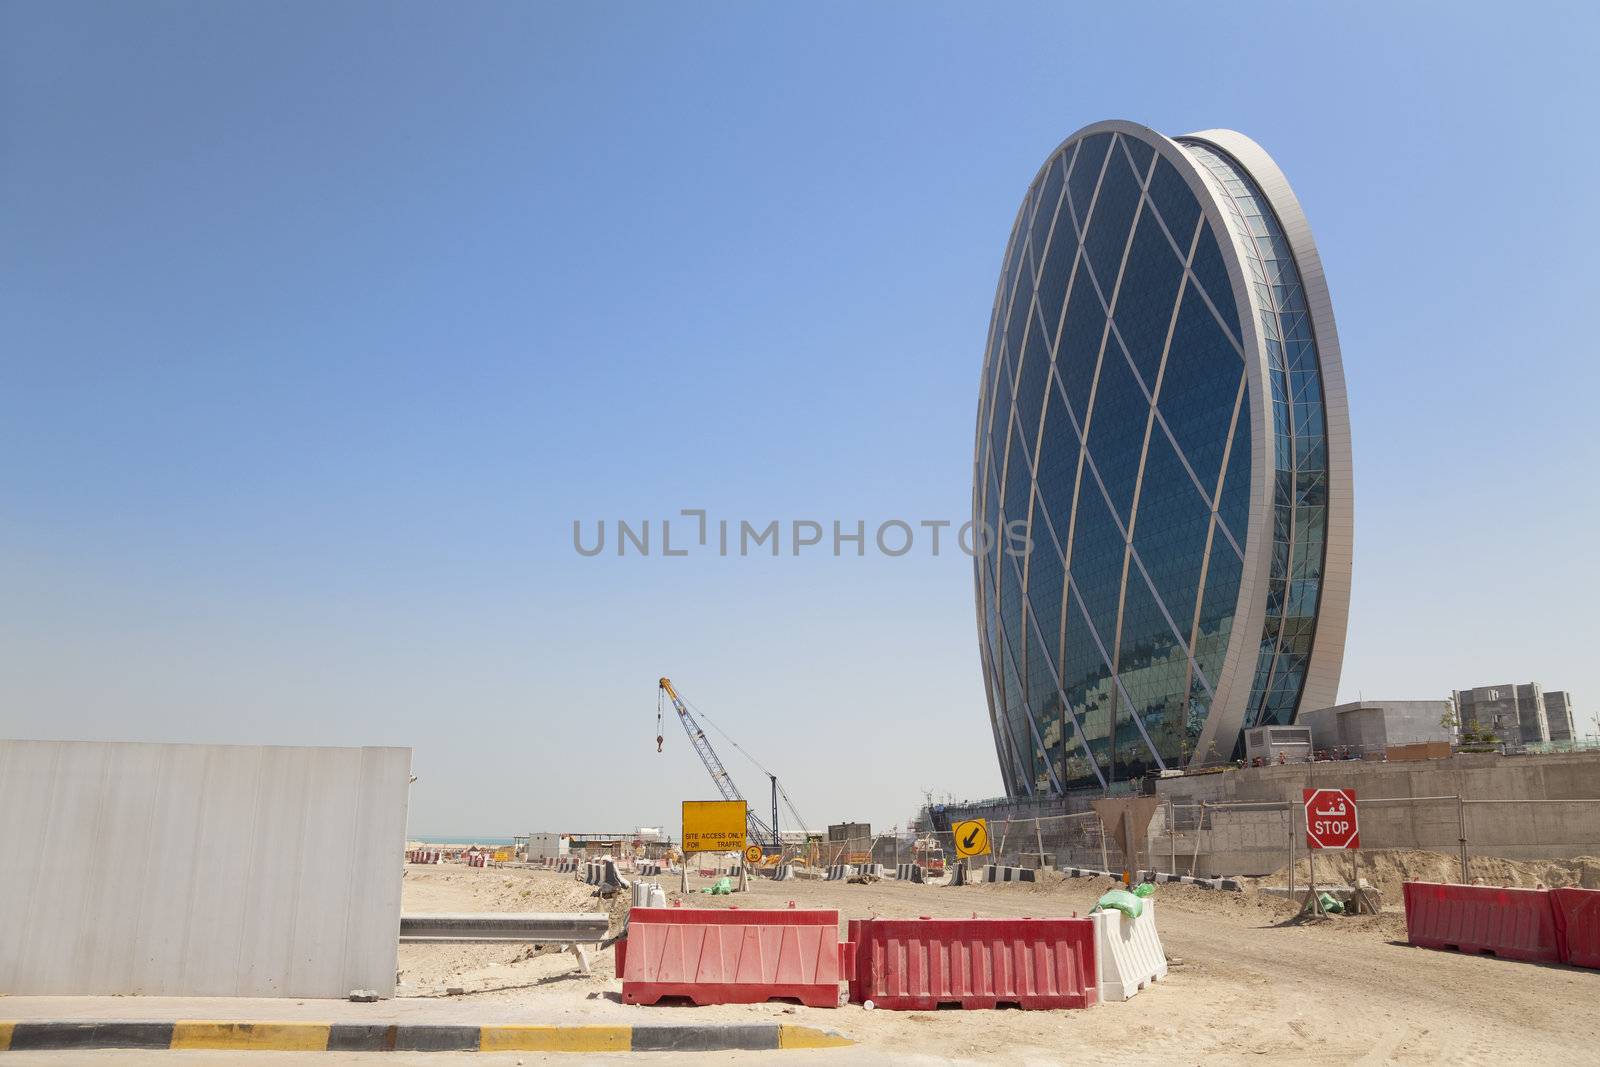 Image of a unique saucer shaped building under construction at Abu Dhabi, United Arab Emirates. One of the many beautiful buildings being constructed in this fast growing country.